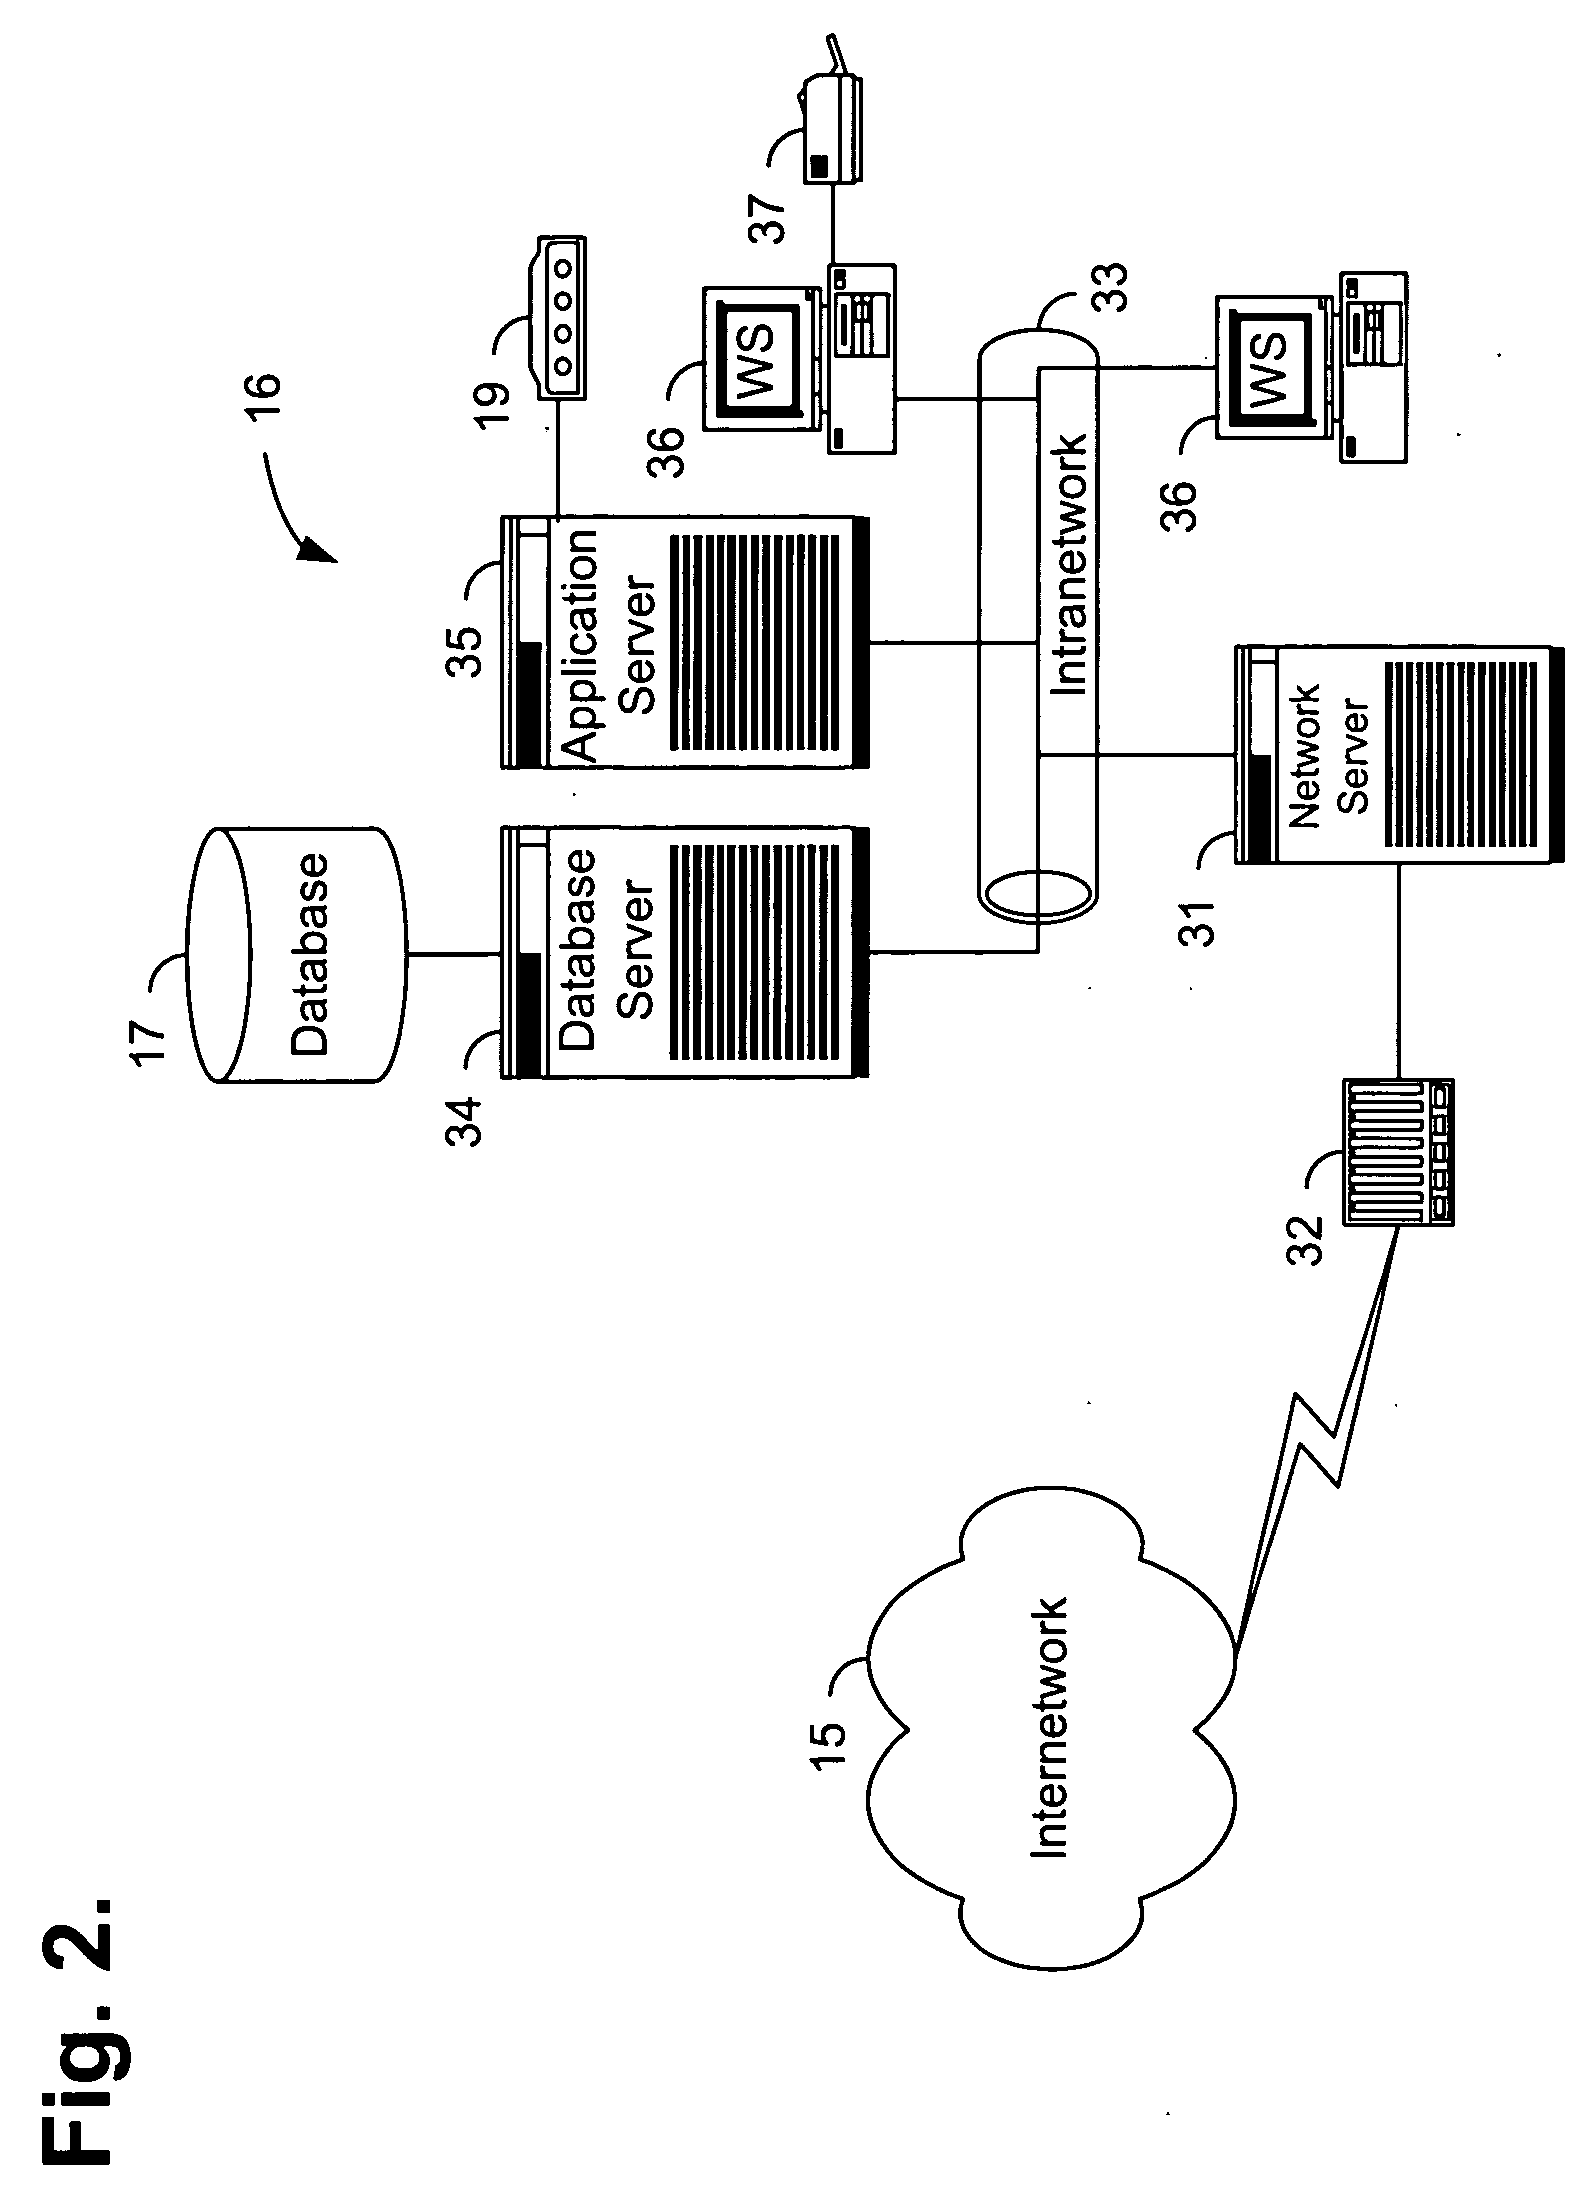 System and method for transacting an automated patient communications session